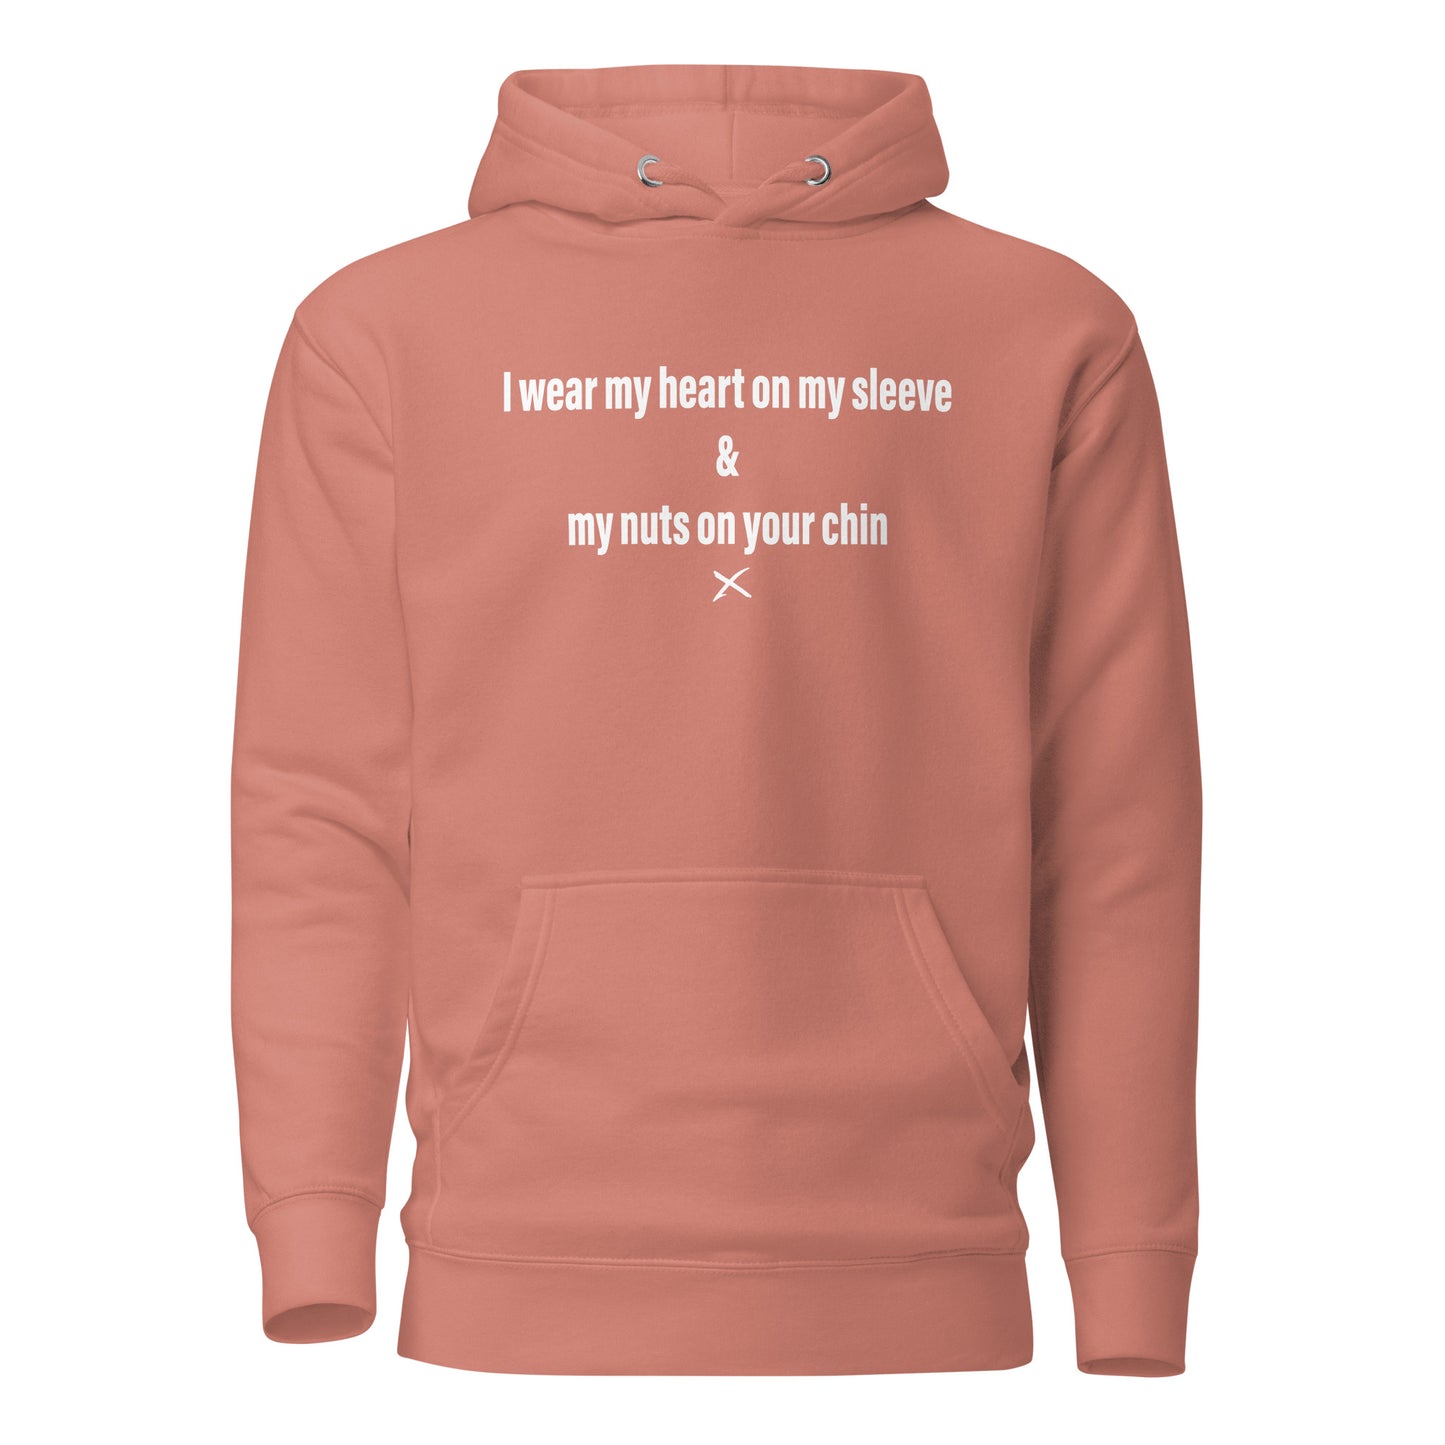 I wear my heart on my sleeve & my nuts on your chin - Hoodie